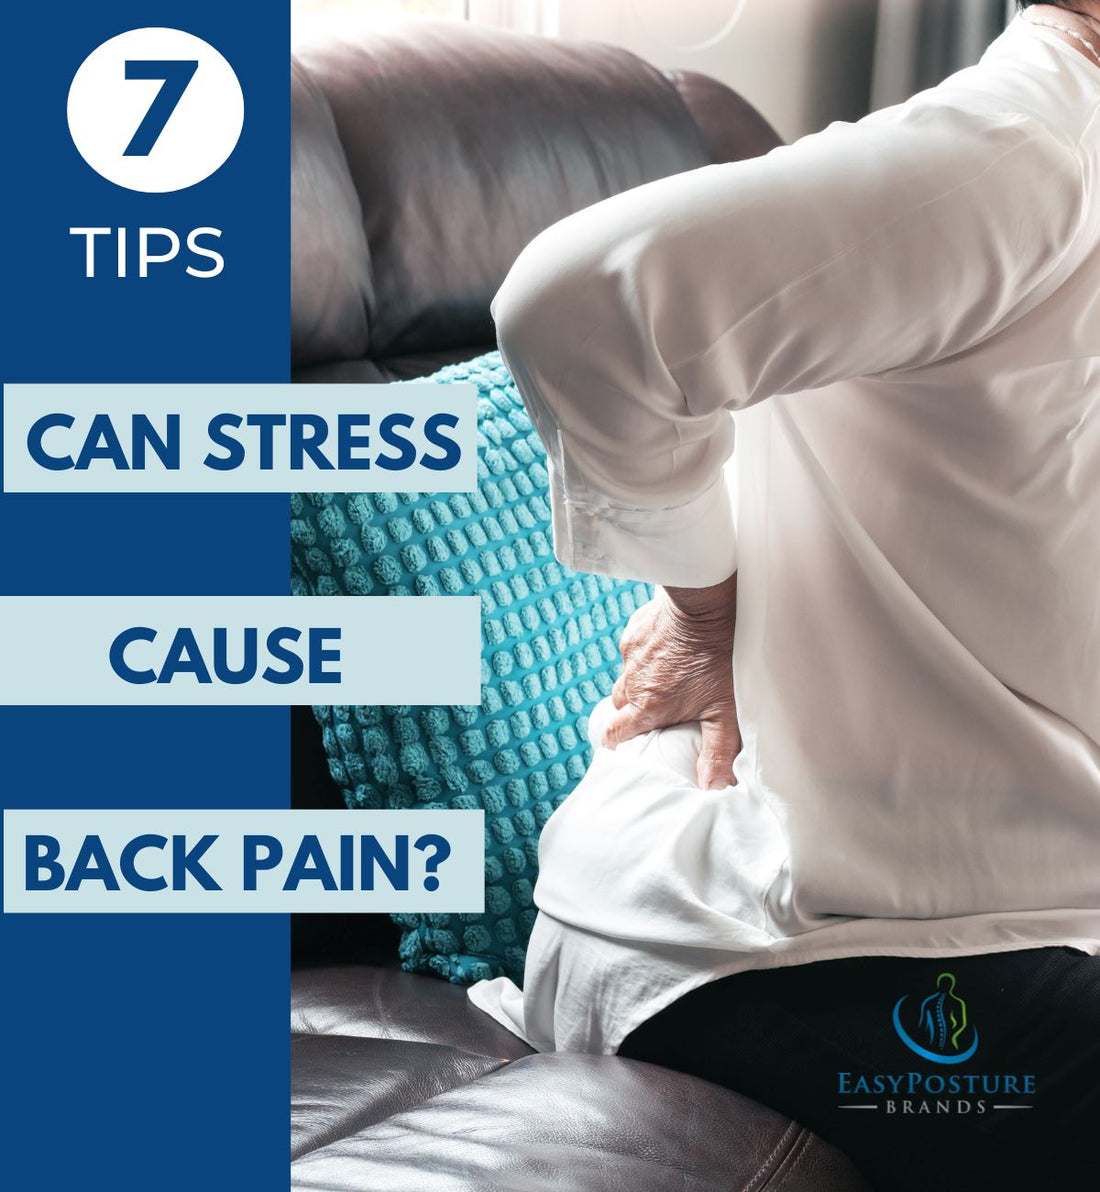 Can Stress Cause Back Pain? 7 Tips to Relieve Stress